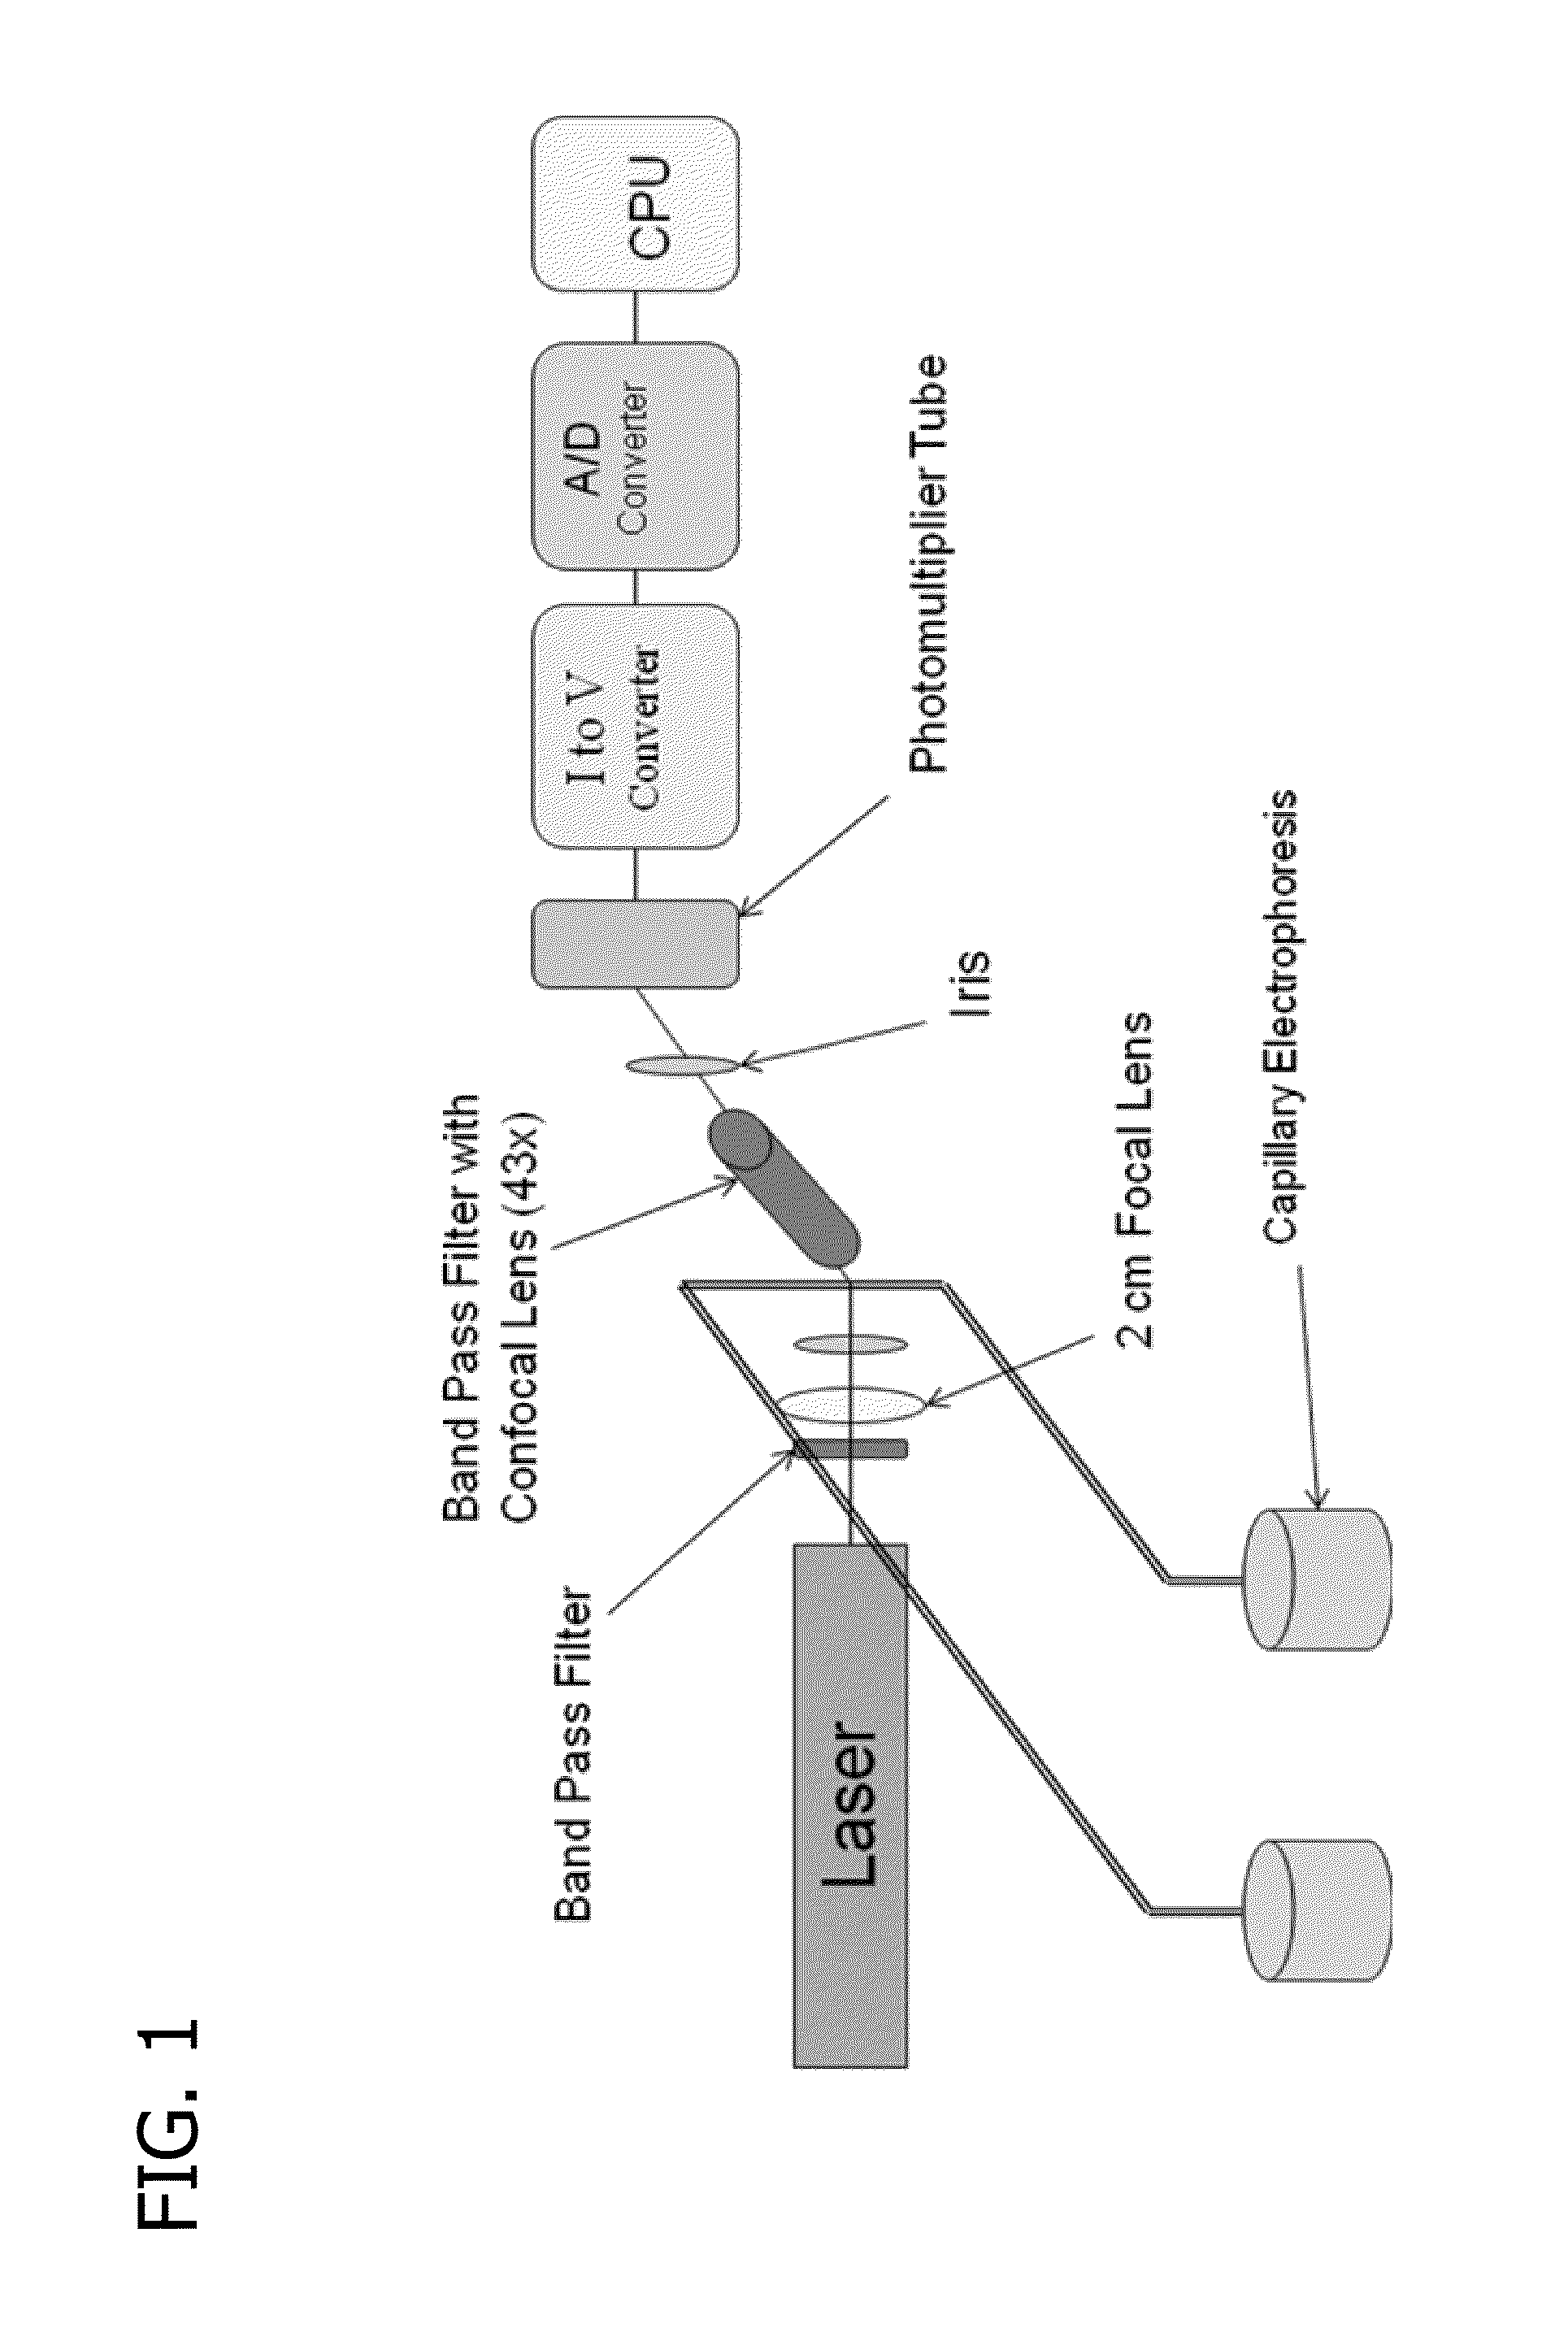 Method and apparatus for cancer screening